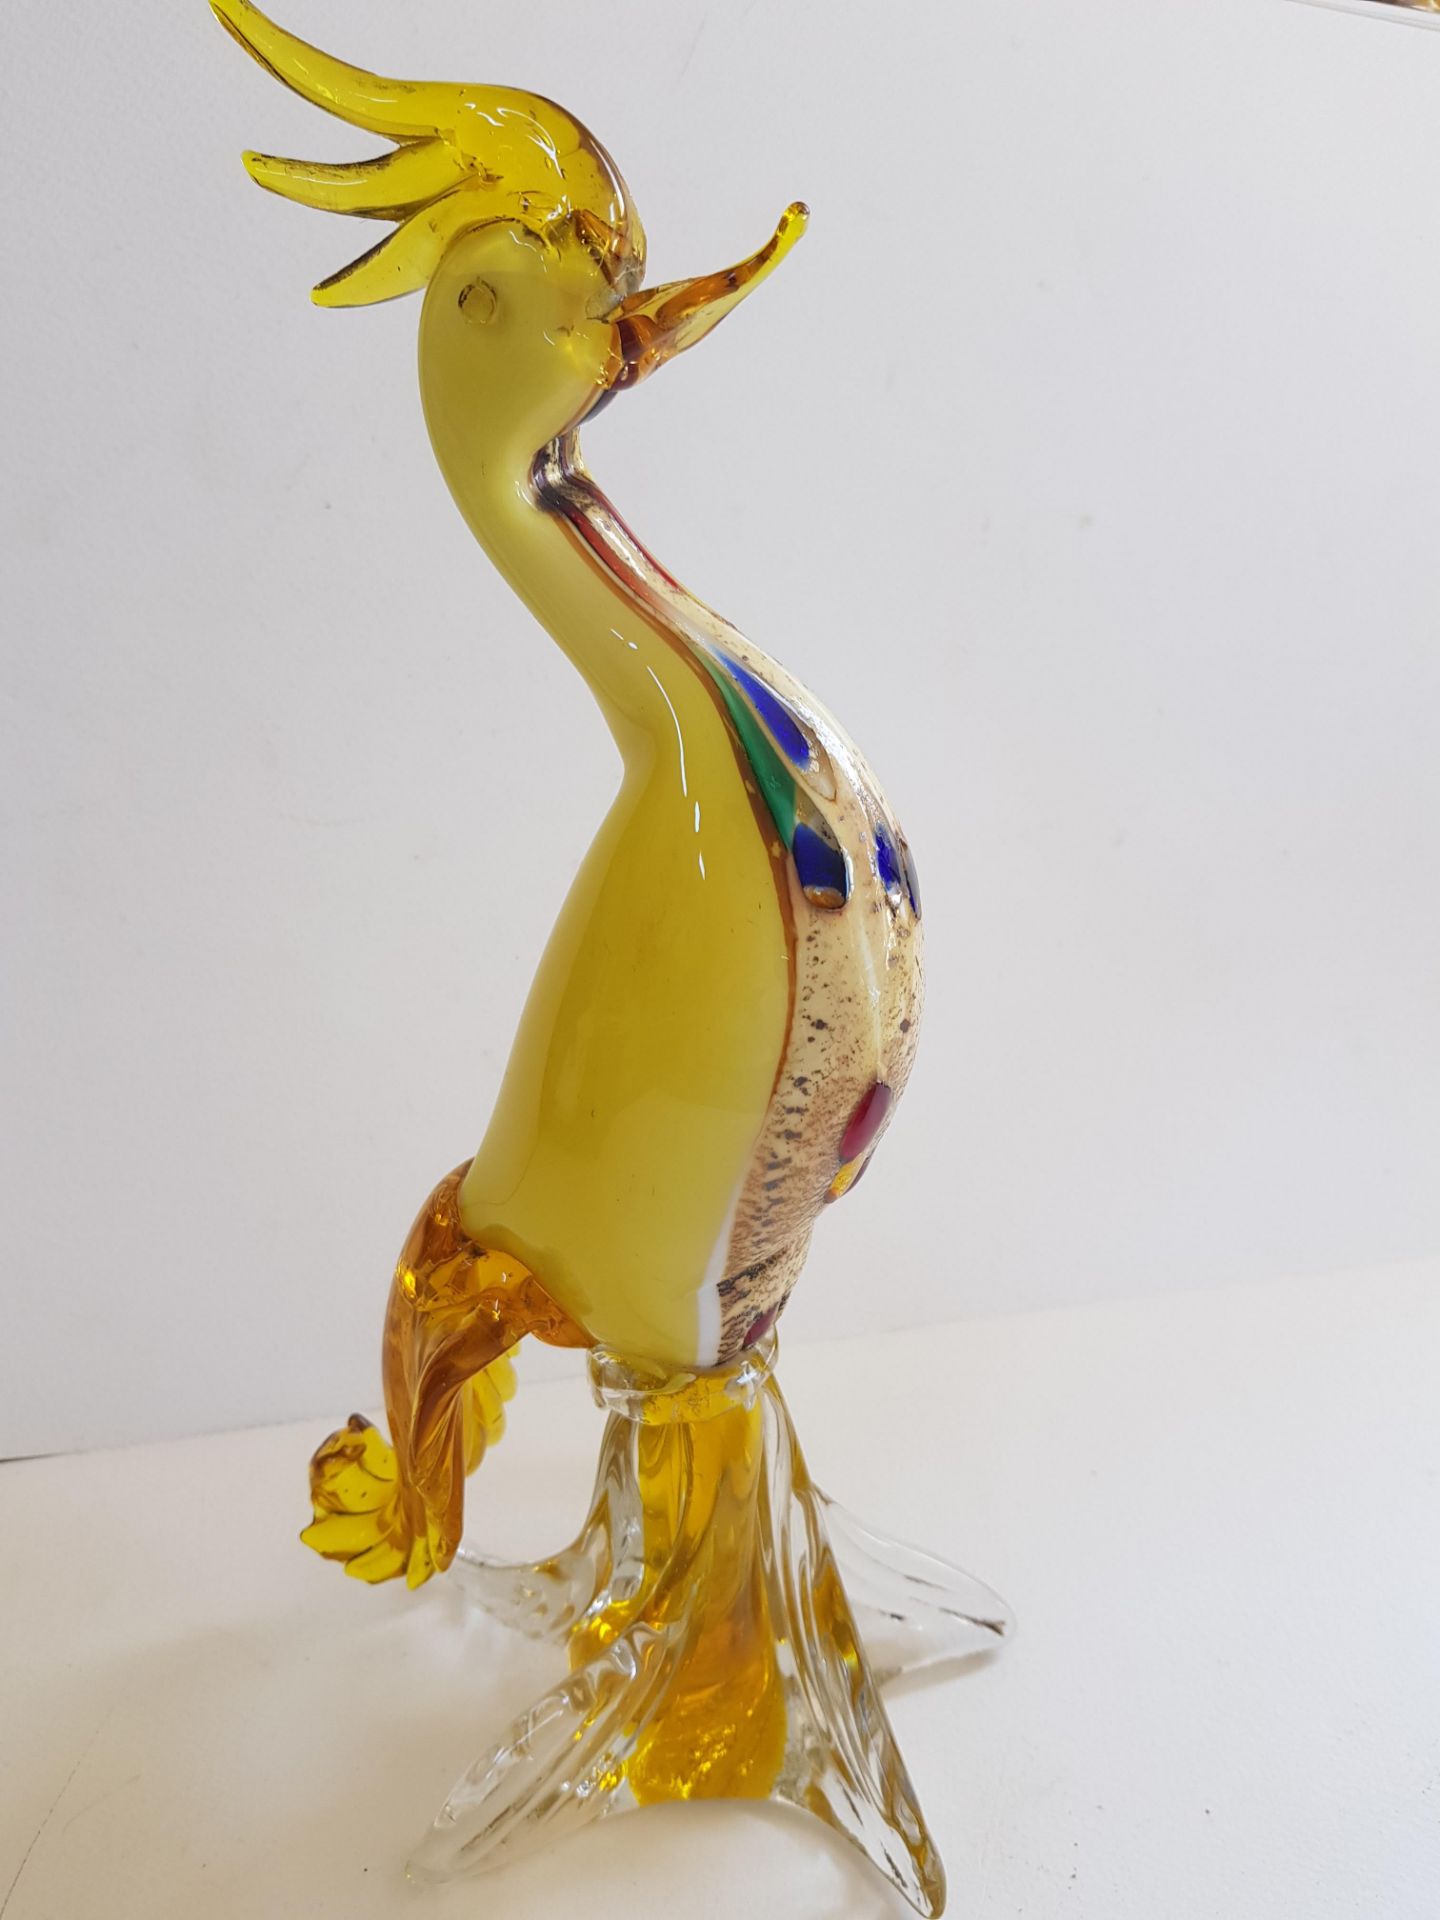 Vintage Royal Doulton Jam Pot With A Magnifying Glass And A Glass Bird - Image 5 of 7